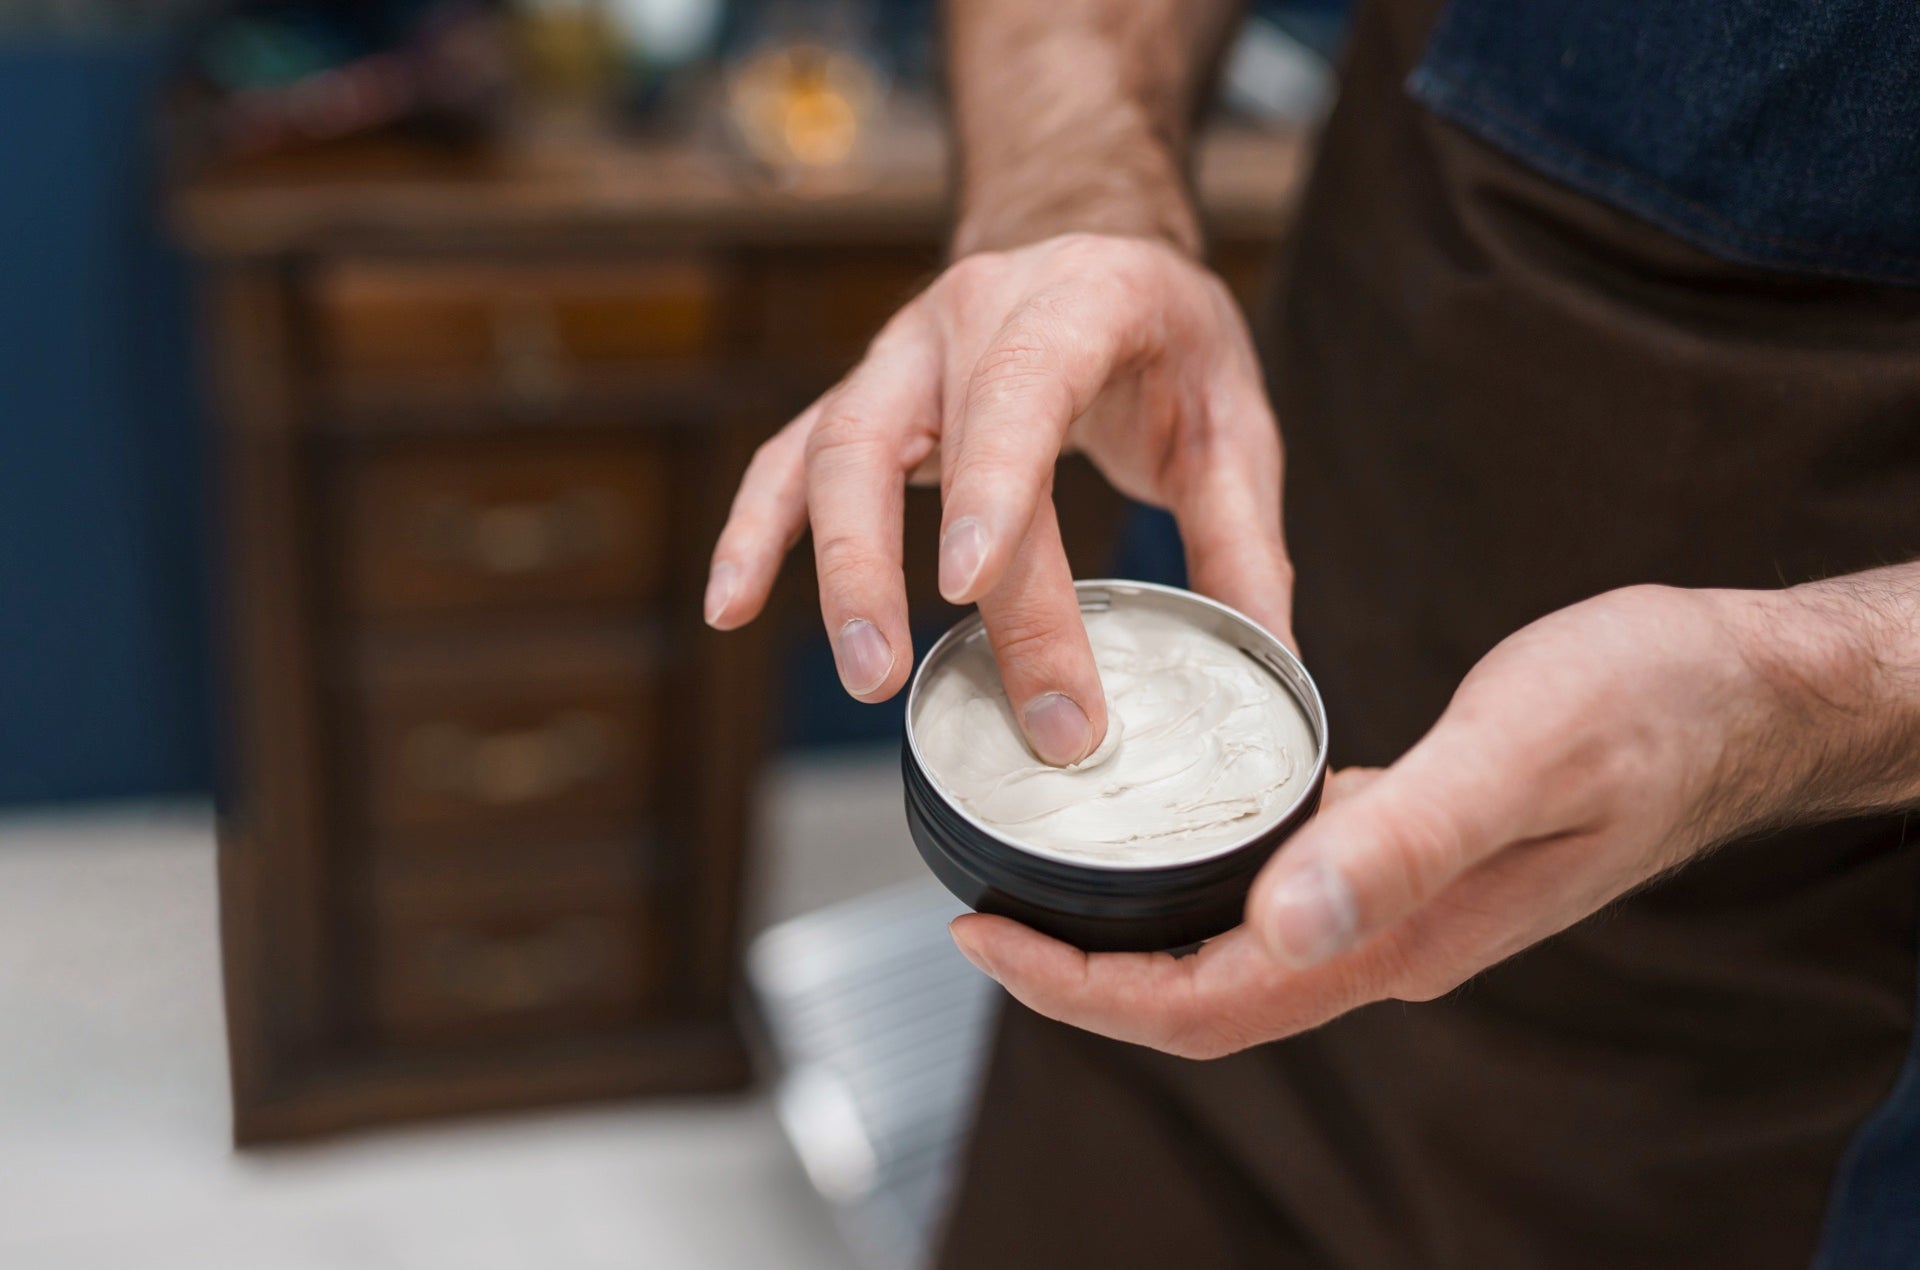 A man's hand dipping a finger into a tin of hair pomade, preparing to style his hair."